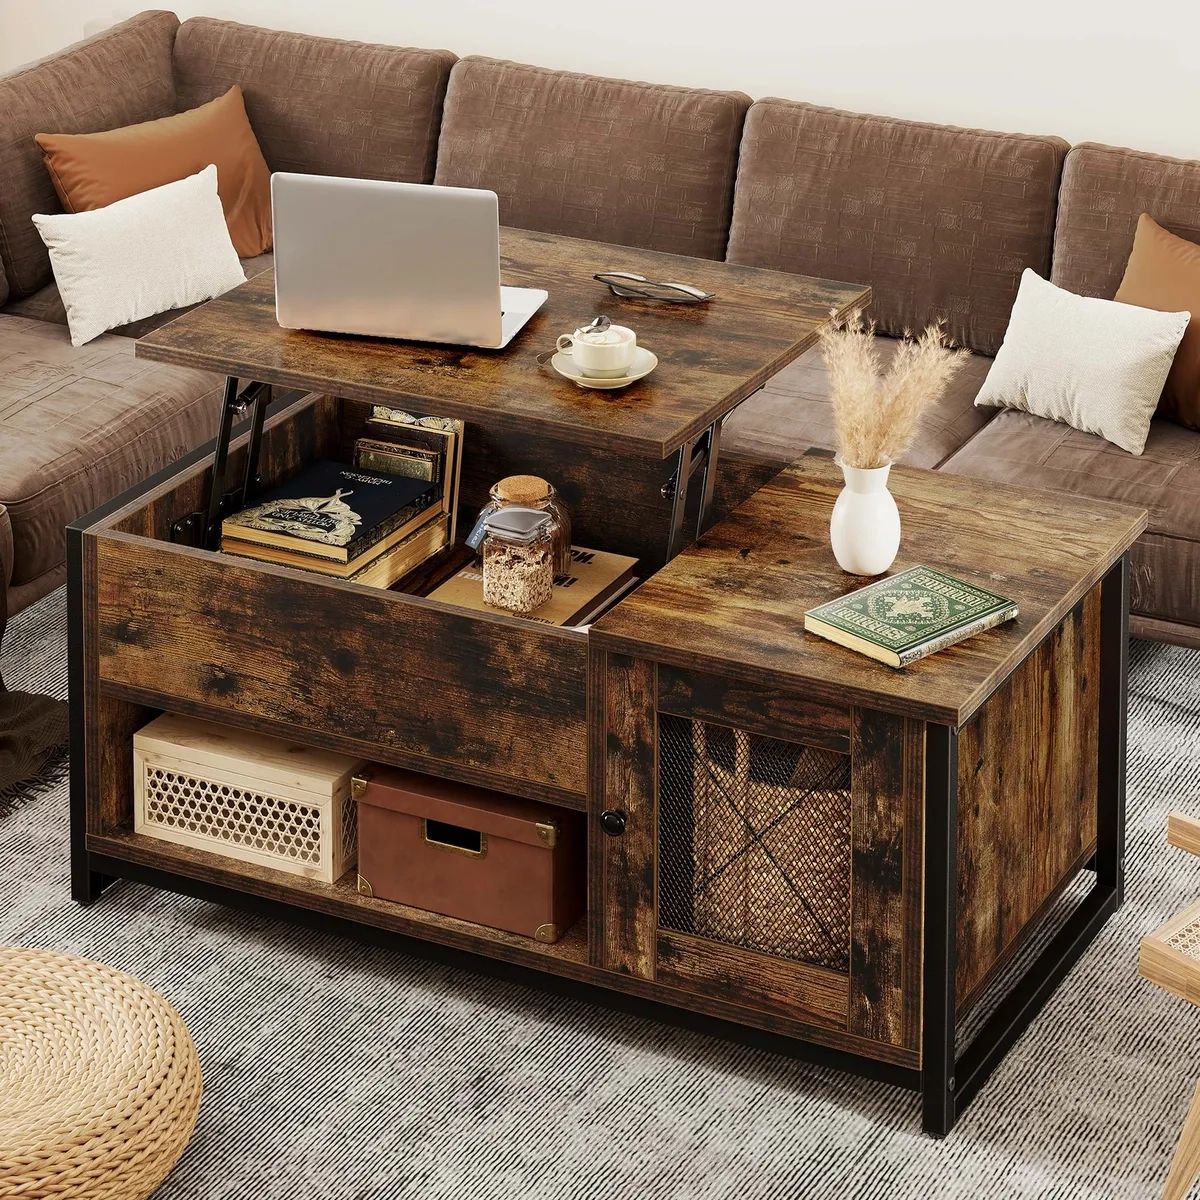 Farmhouse Lift Top Coffee Table With Hidden Compartment And Storage Shelf  Brown | Ebay Regarding Lift Top Coffee Tables With Storage (View 4 of 15)